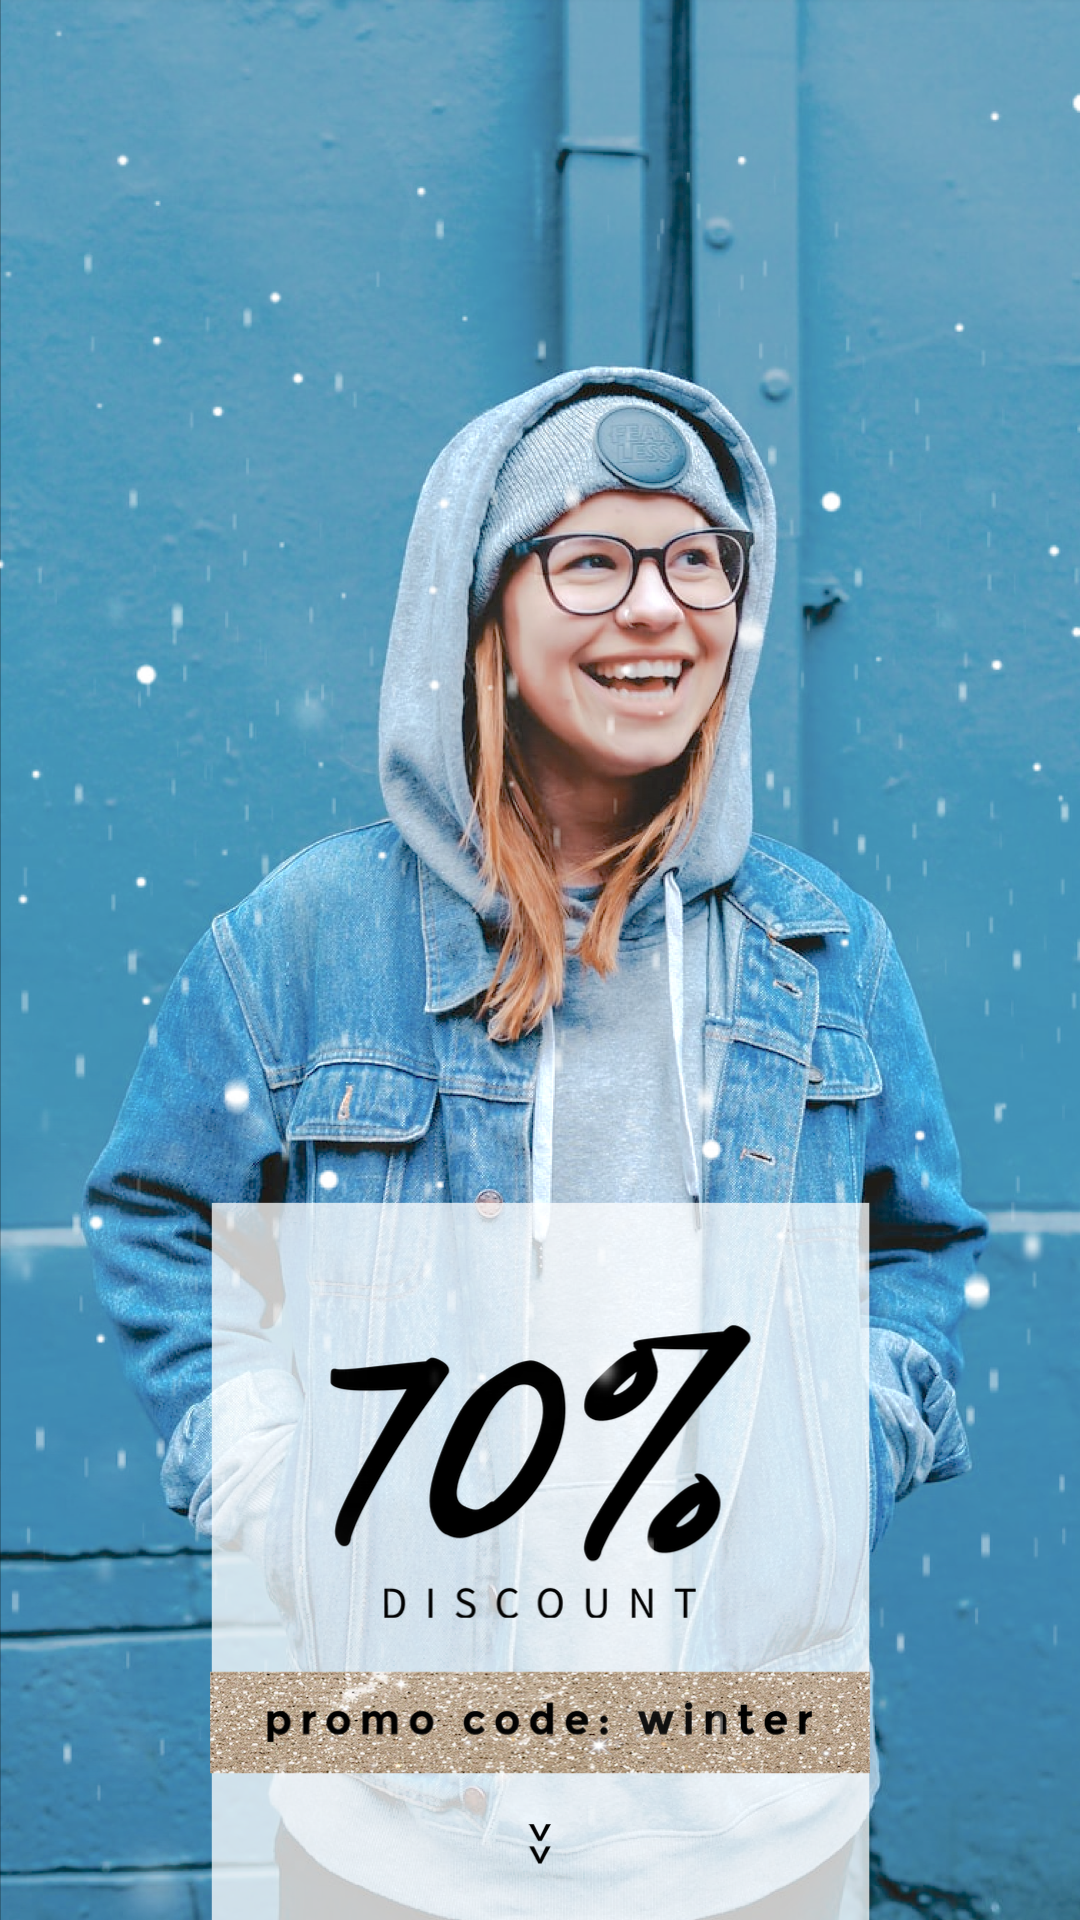 Woman jacket winter 70% discount Winter Story template